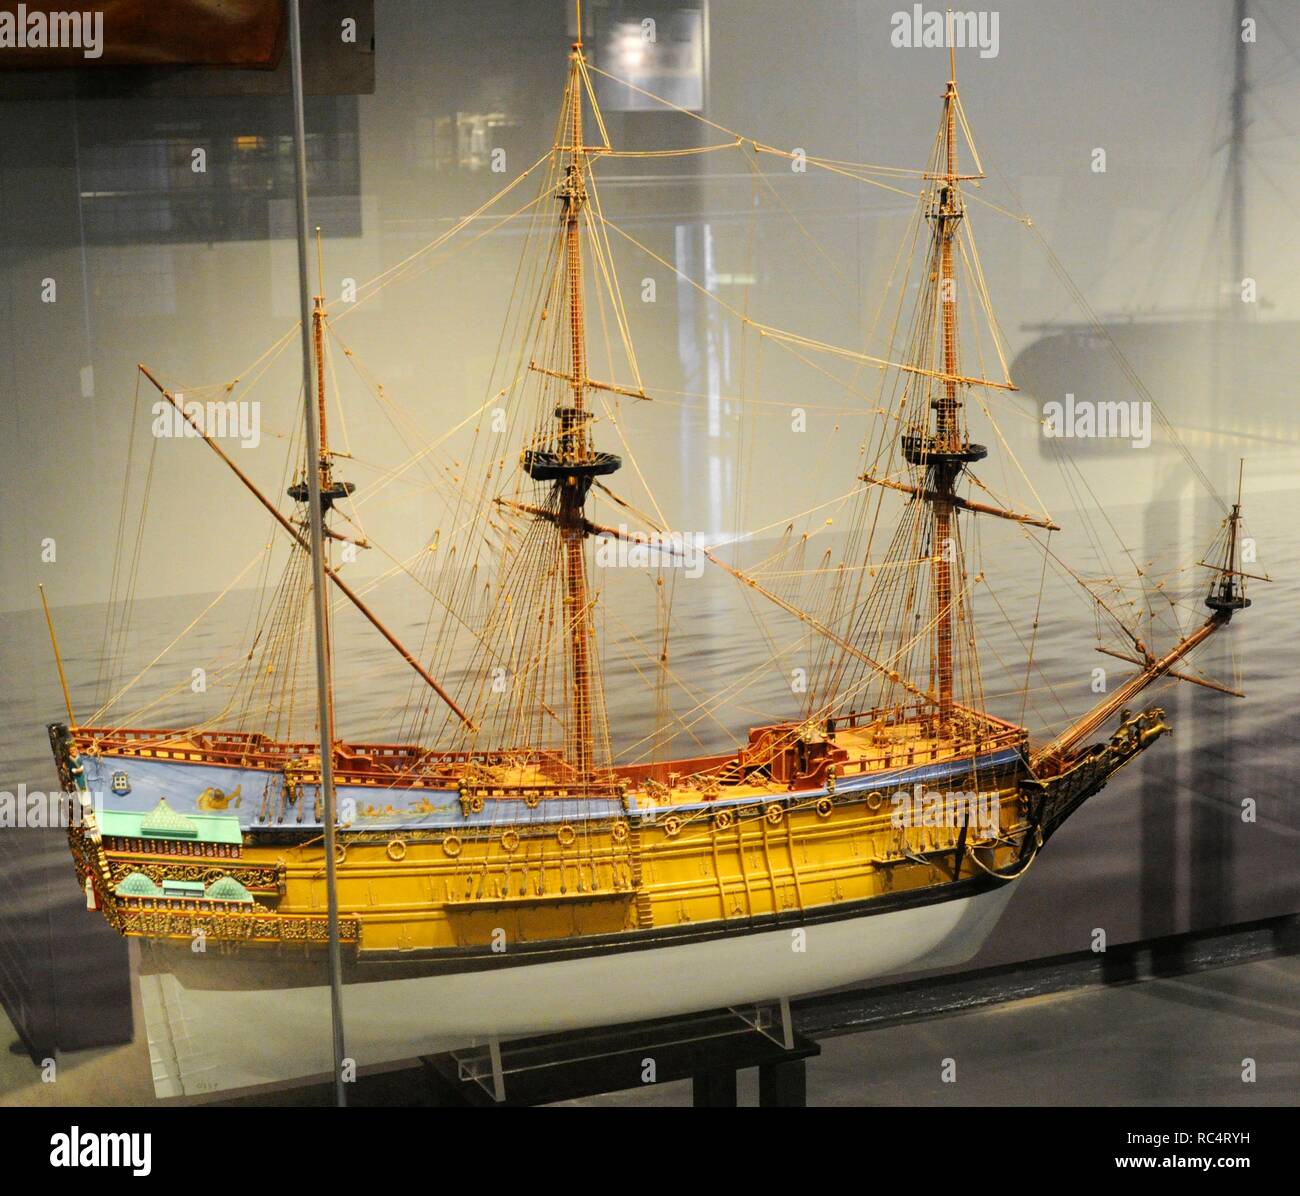 The ship of the Royal Dano-Norwegian Navy Sophia Amalia, the wife of King Frederick III. Built  by James Robbins. 1637-1650. Was commissioned by King Christian IV. Norwegian Maritime Museum. Oslo. Norway. Stock Photo